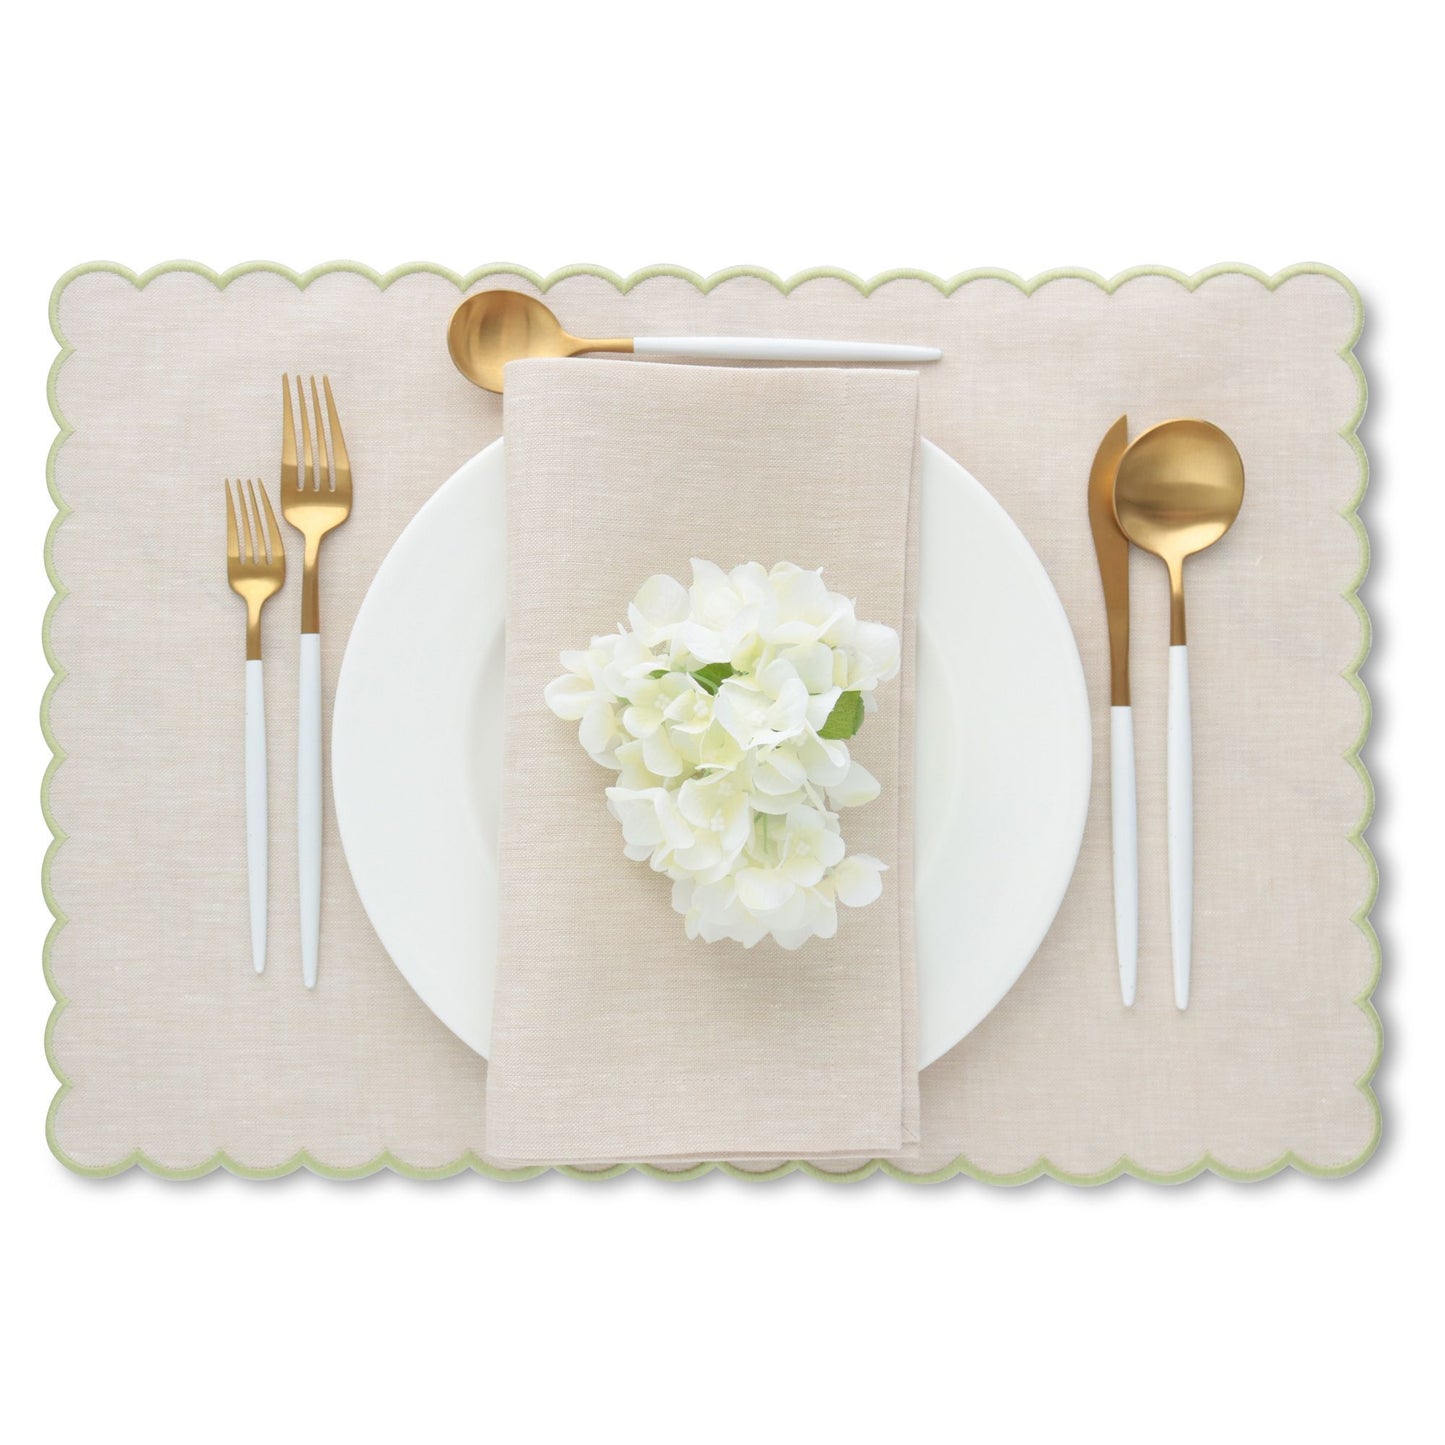 Beach and Green scalloped border placemats (set of 4)